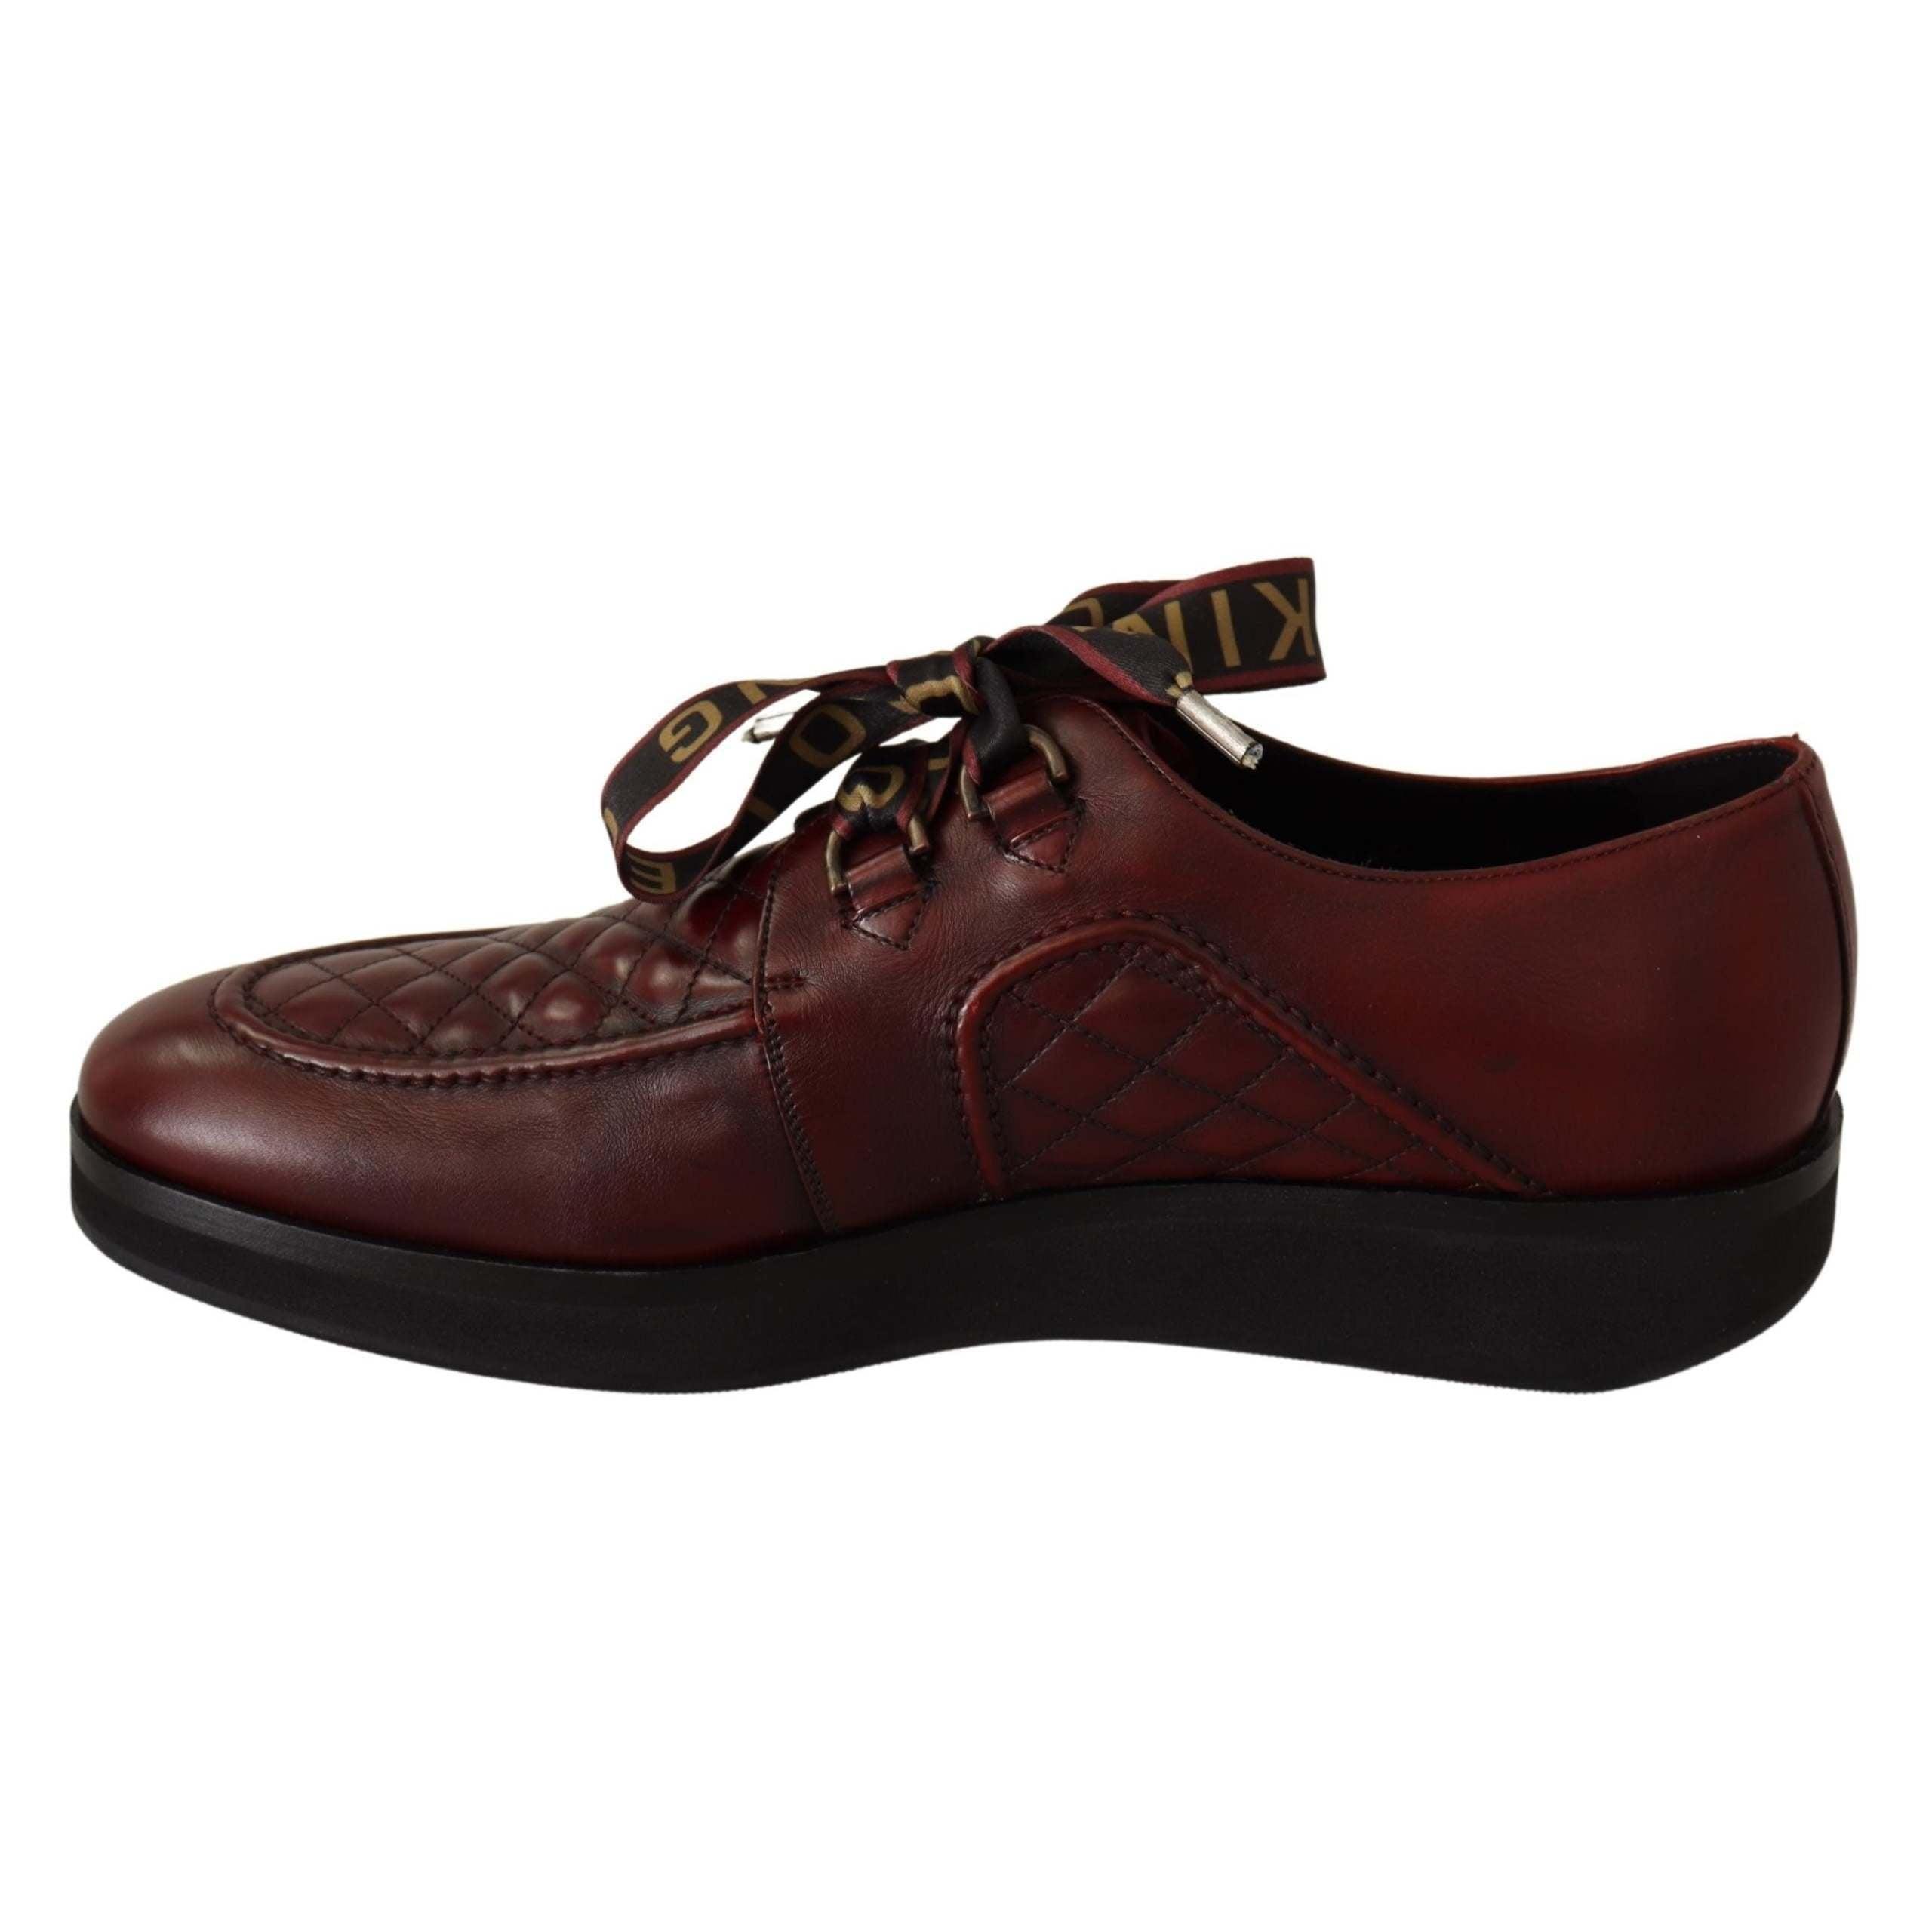 Dolce & Gabbana Bordeaux Leather Derby Dress Shoes in Red for Men Mens Shoes Lace-ups Derby shoes 